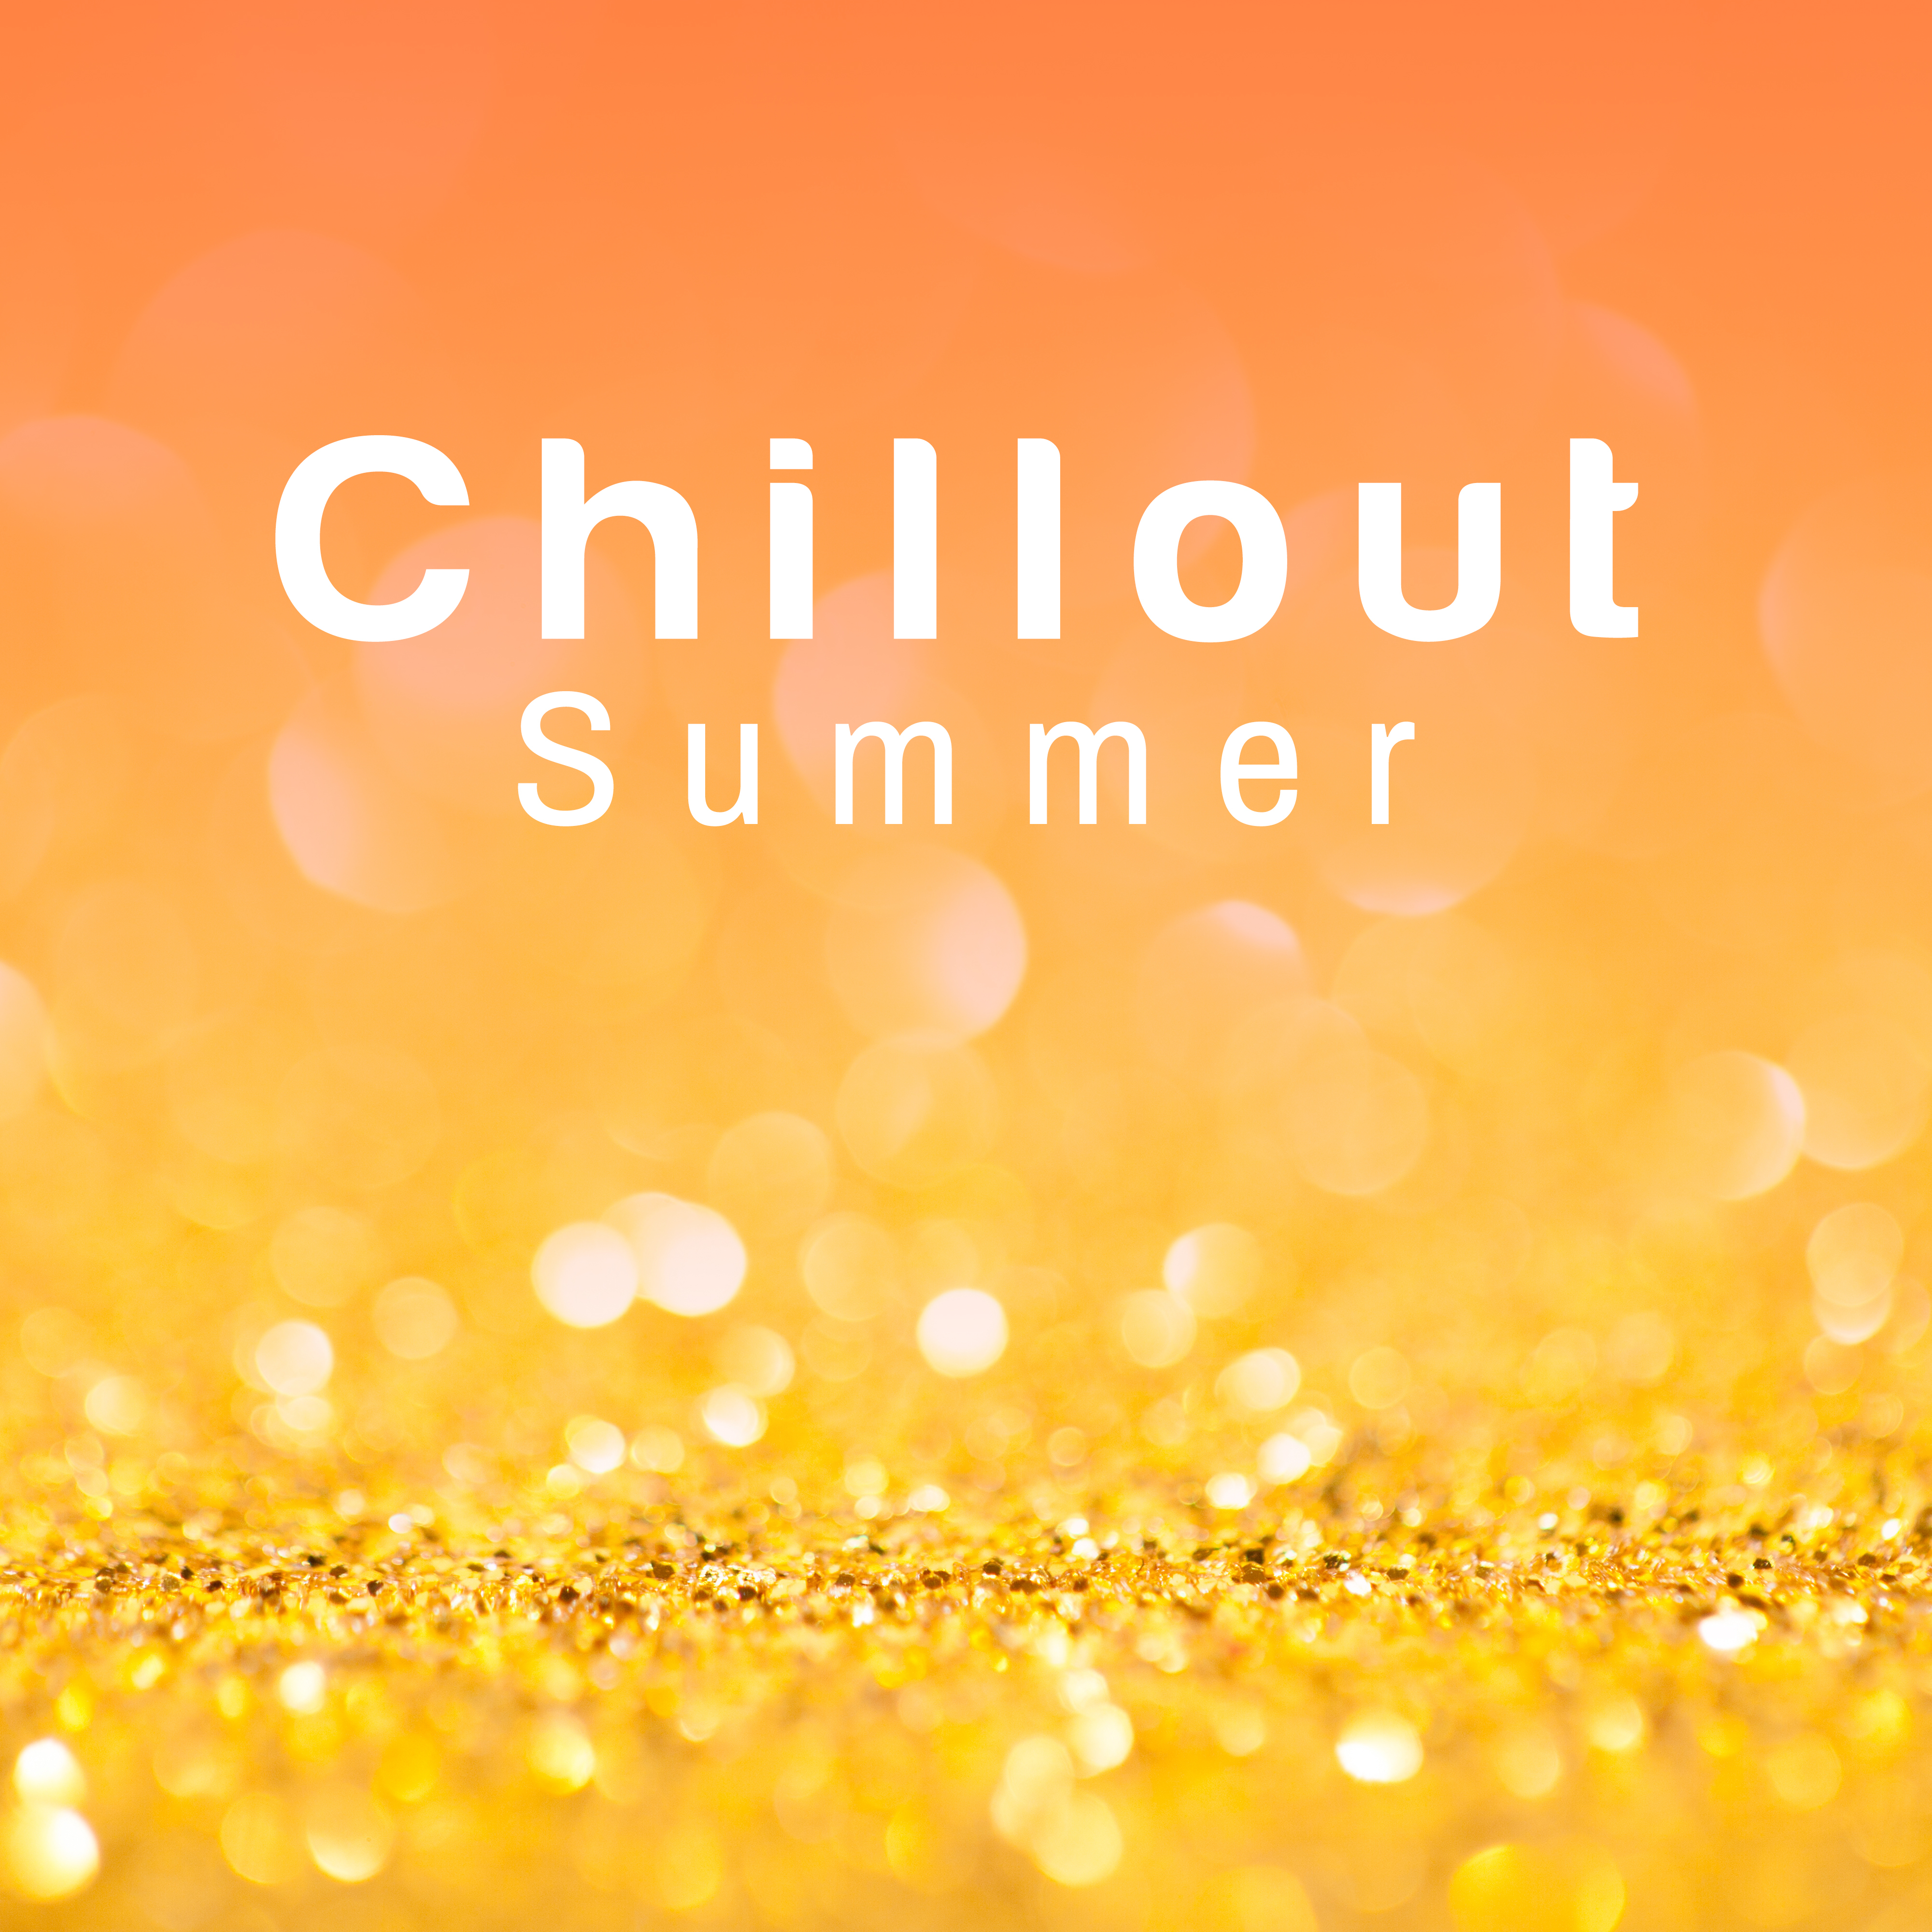 Chillout Summer – Ibiza 2017, Sounds of Sea, Deep Vibes Now, Lounge Tunes, Relax